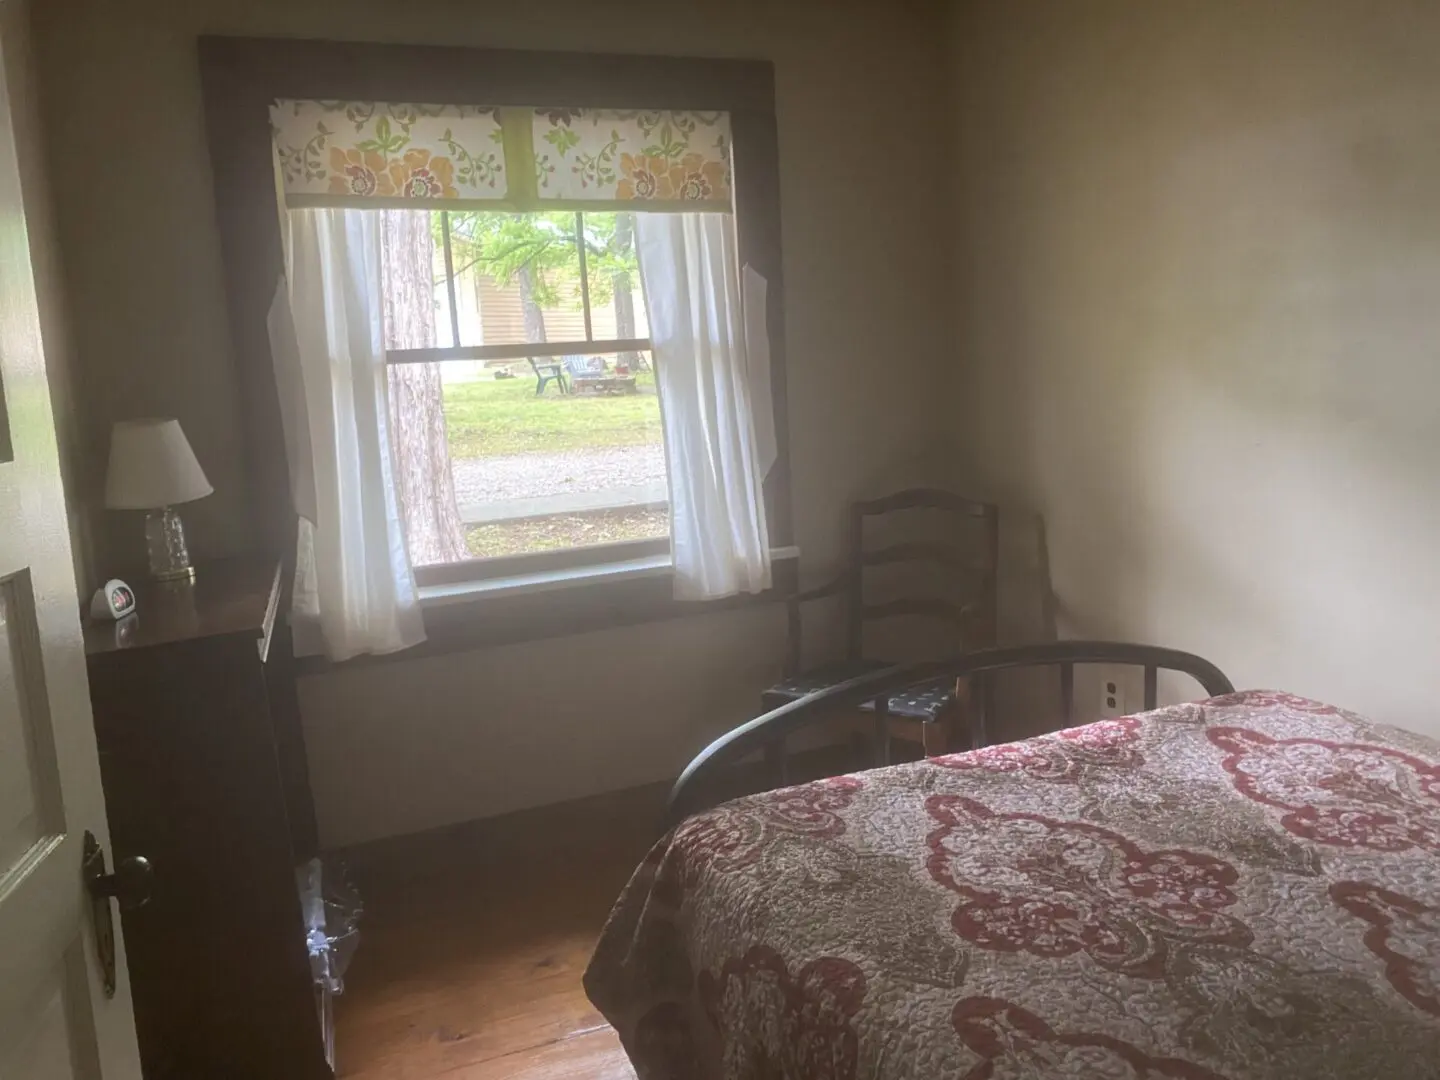 A bedroom with a bed, chair and window.